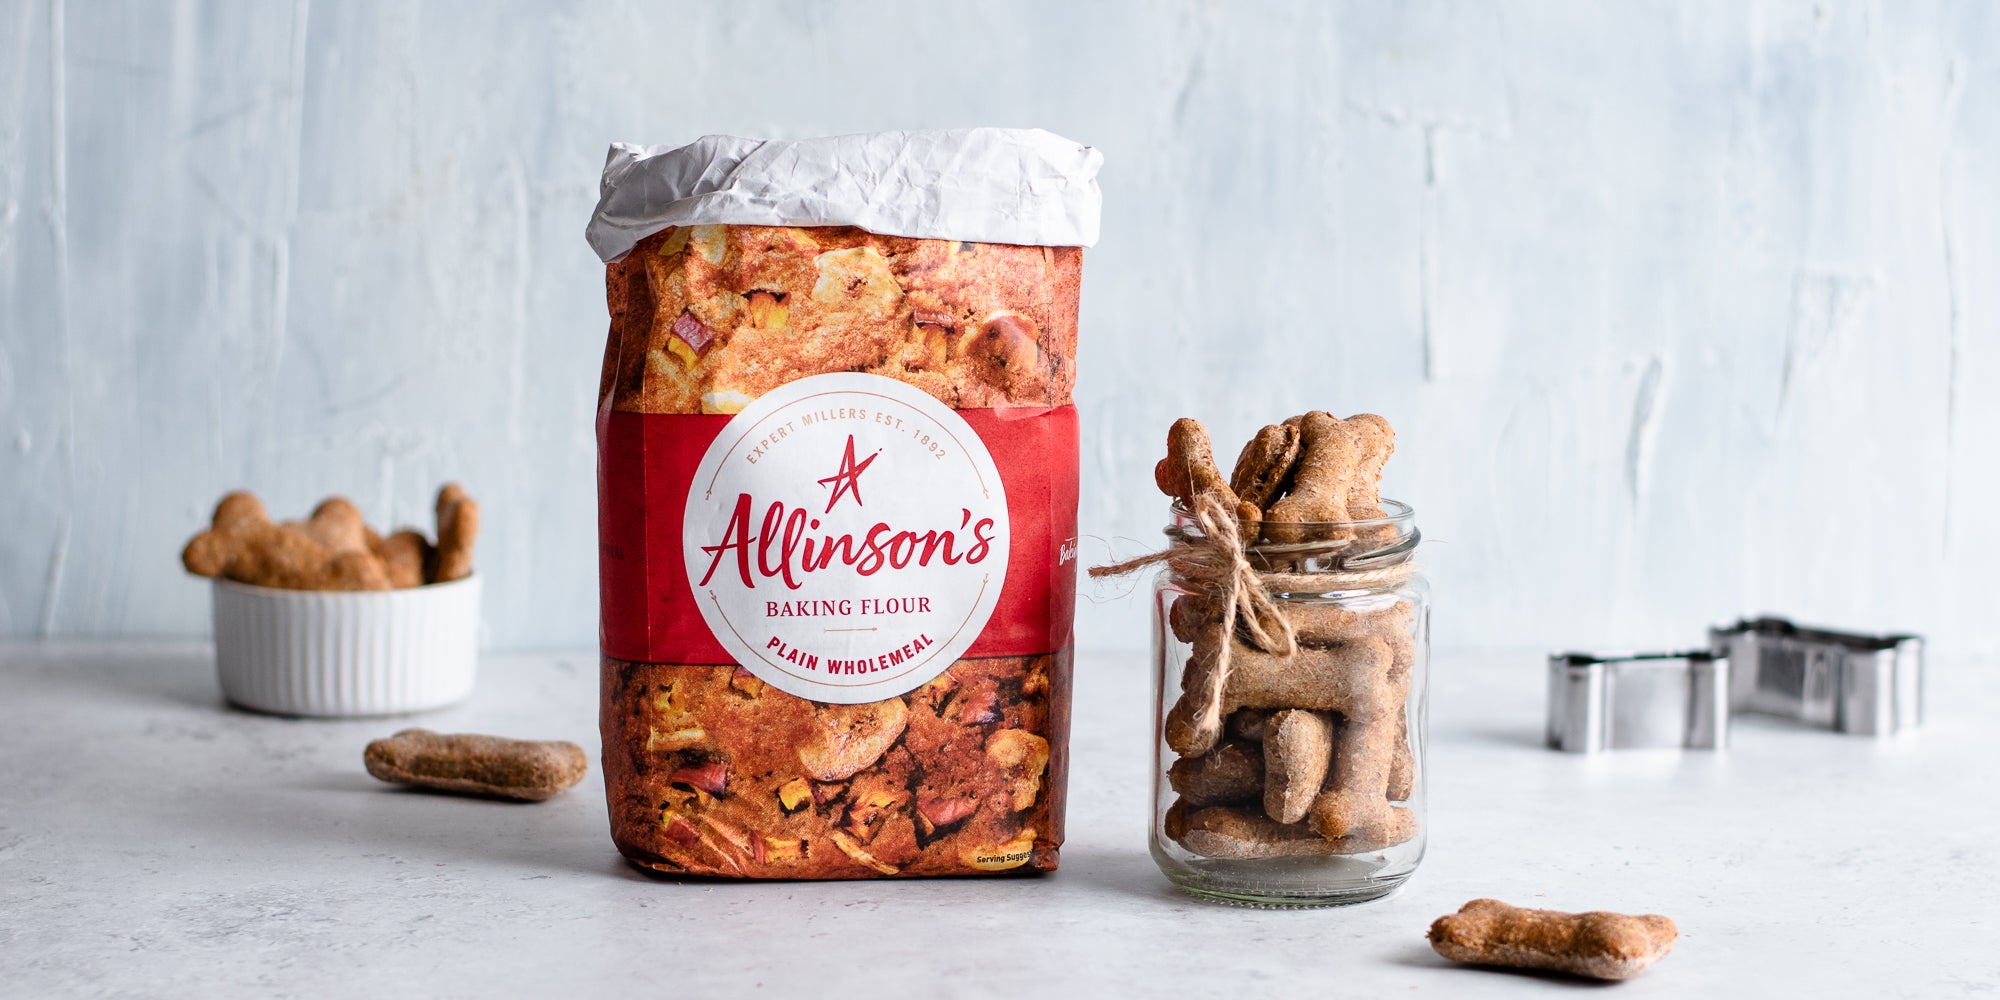 Dog Biscuits in a glass jar next to a bag of Allinson's Plain flour